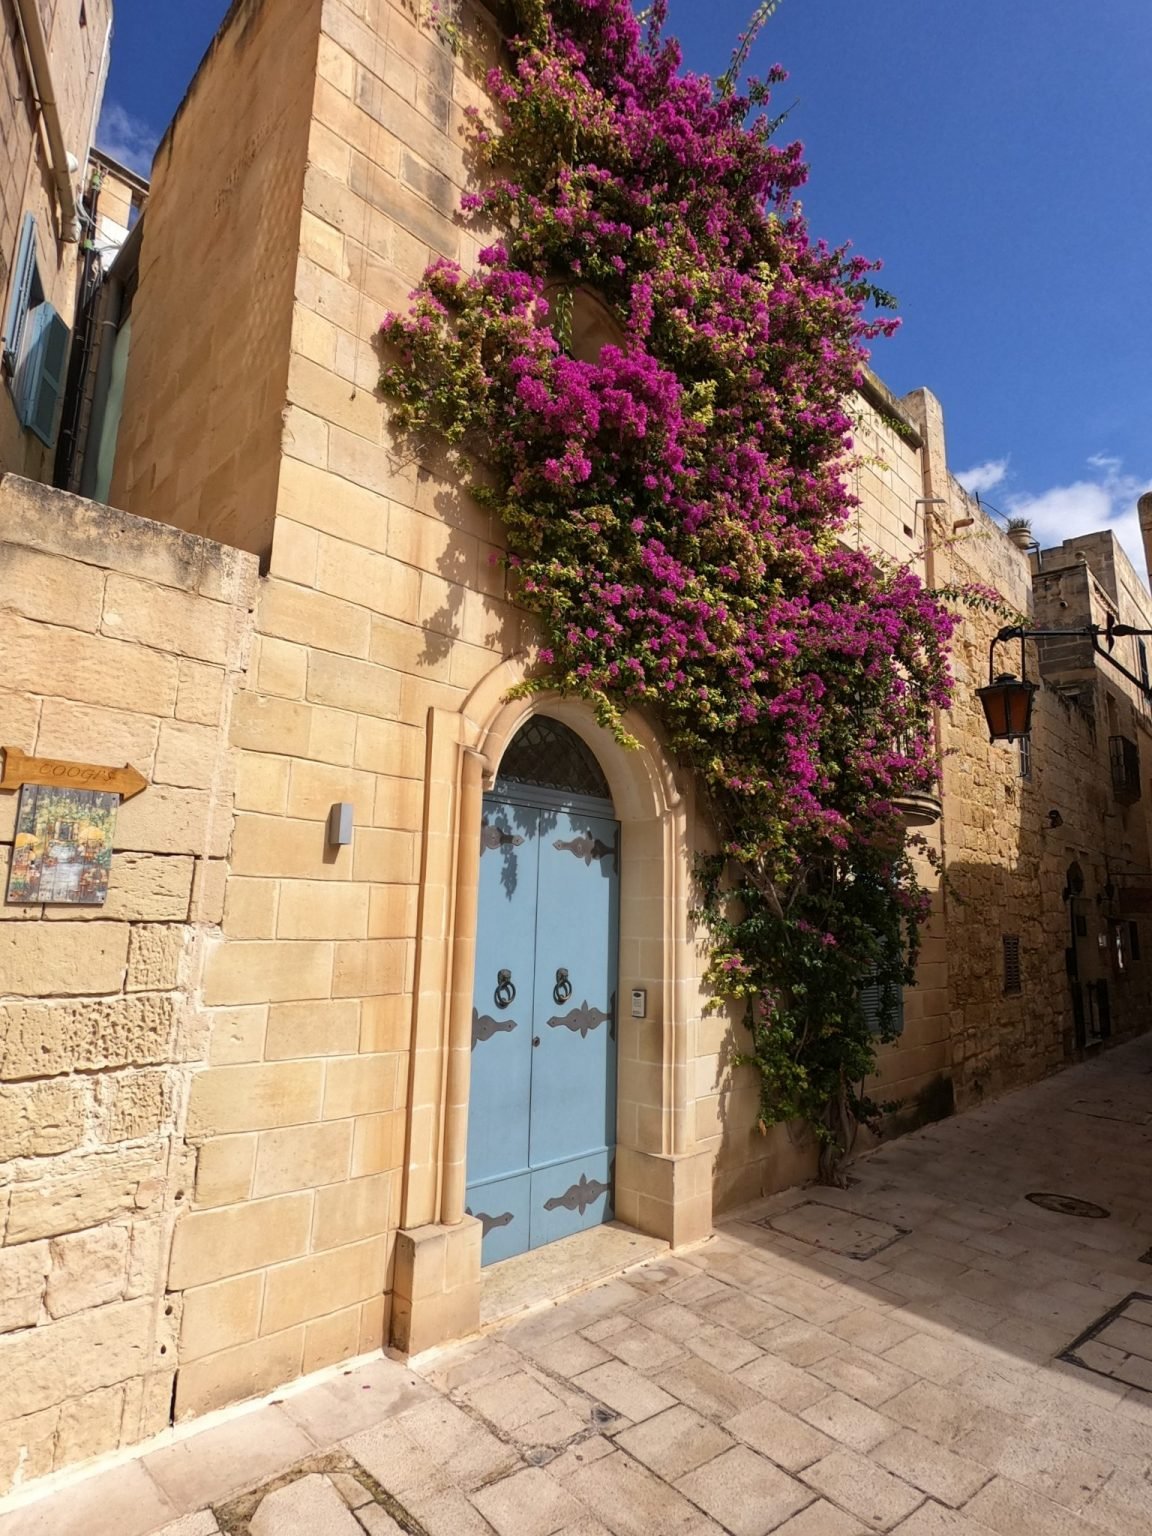 7 days in Malta: Our Malta Itinerary (Part 2) | Two by the World